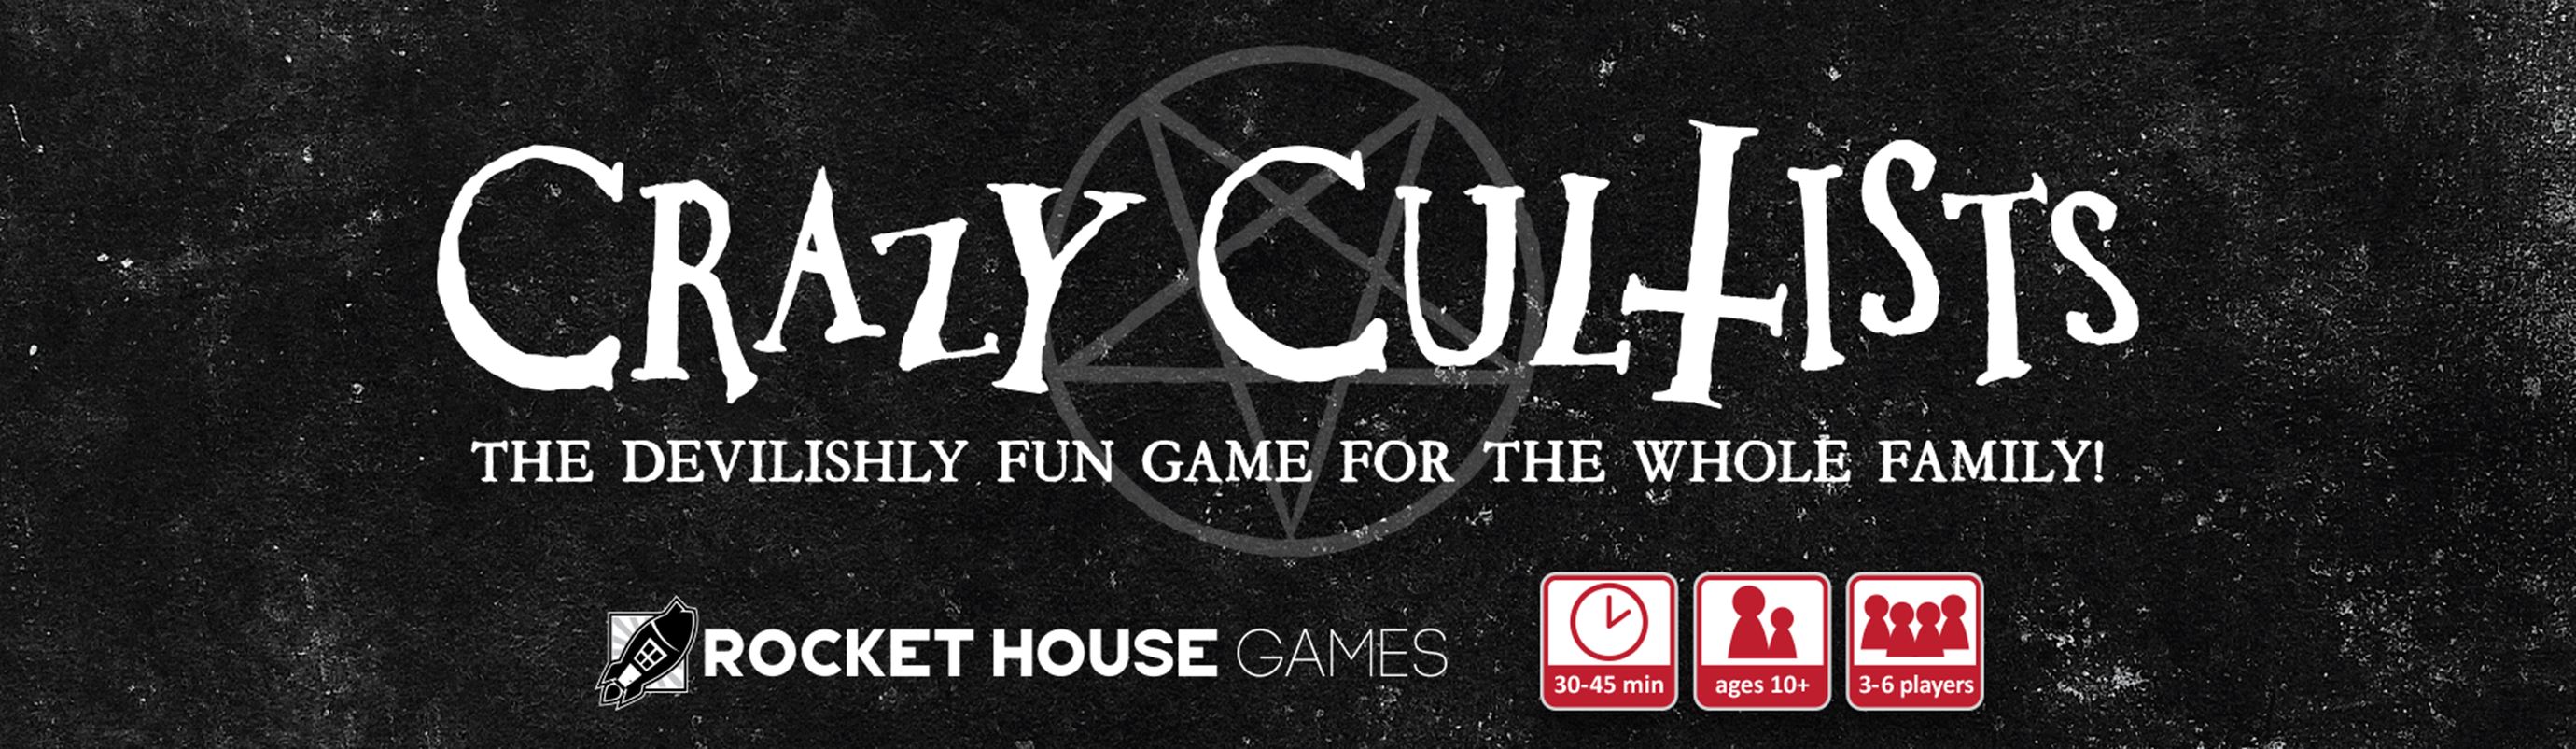 Crazy Cultists: The Devilishly Fun Game For The Whole Family!